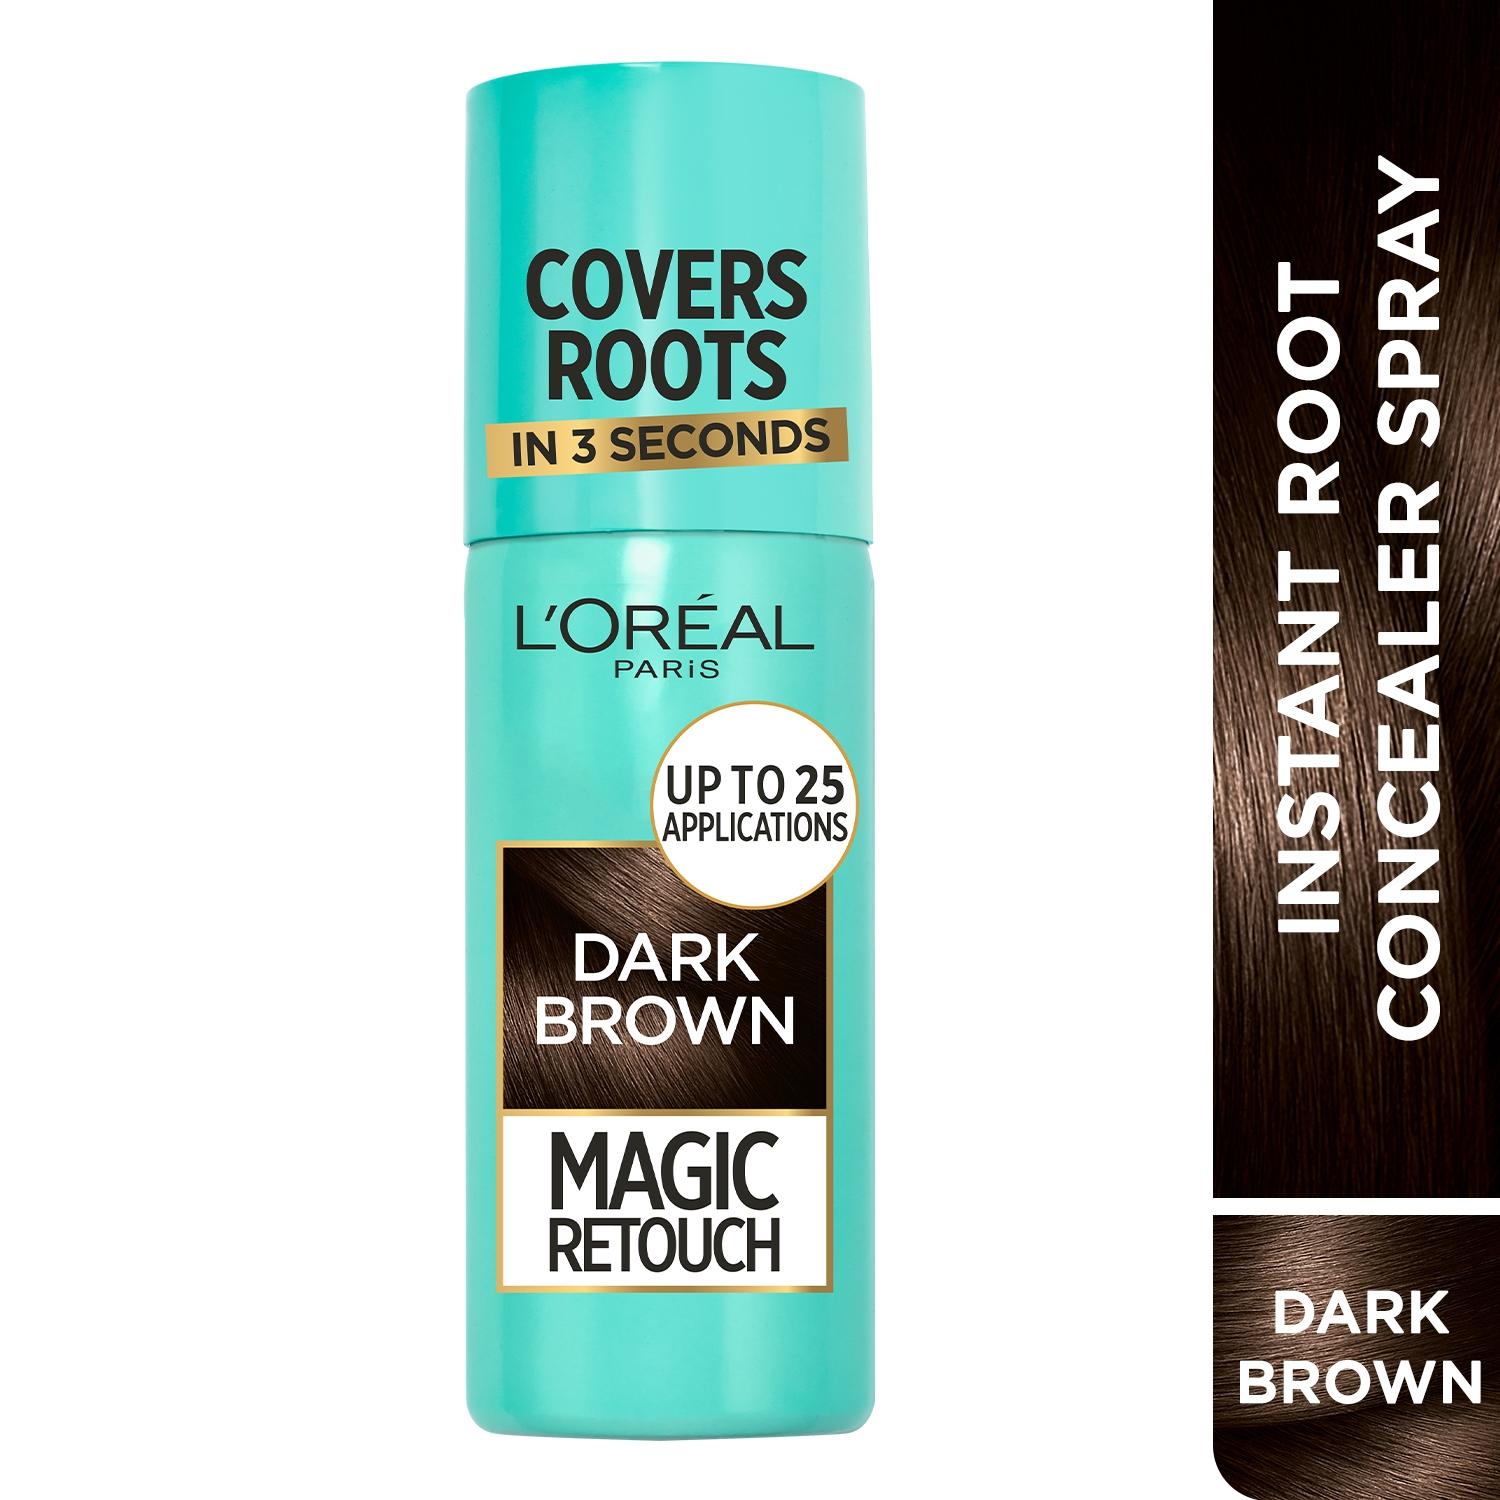 l'oreal-paris-magic-retouch-root-touch-up-hair-color-spray---2-dark-brown-(75ml)